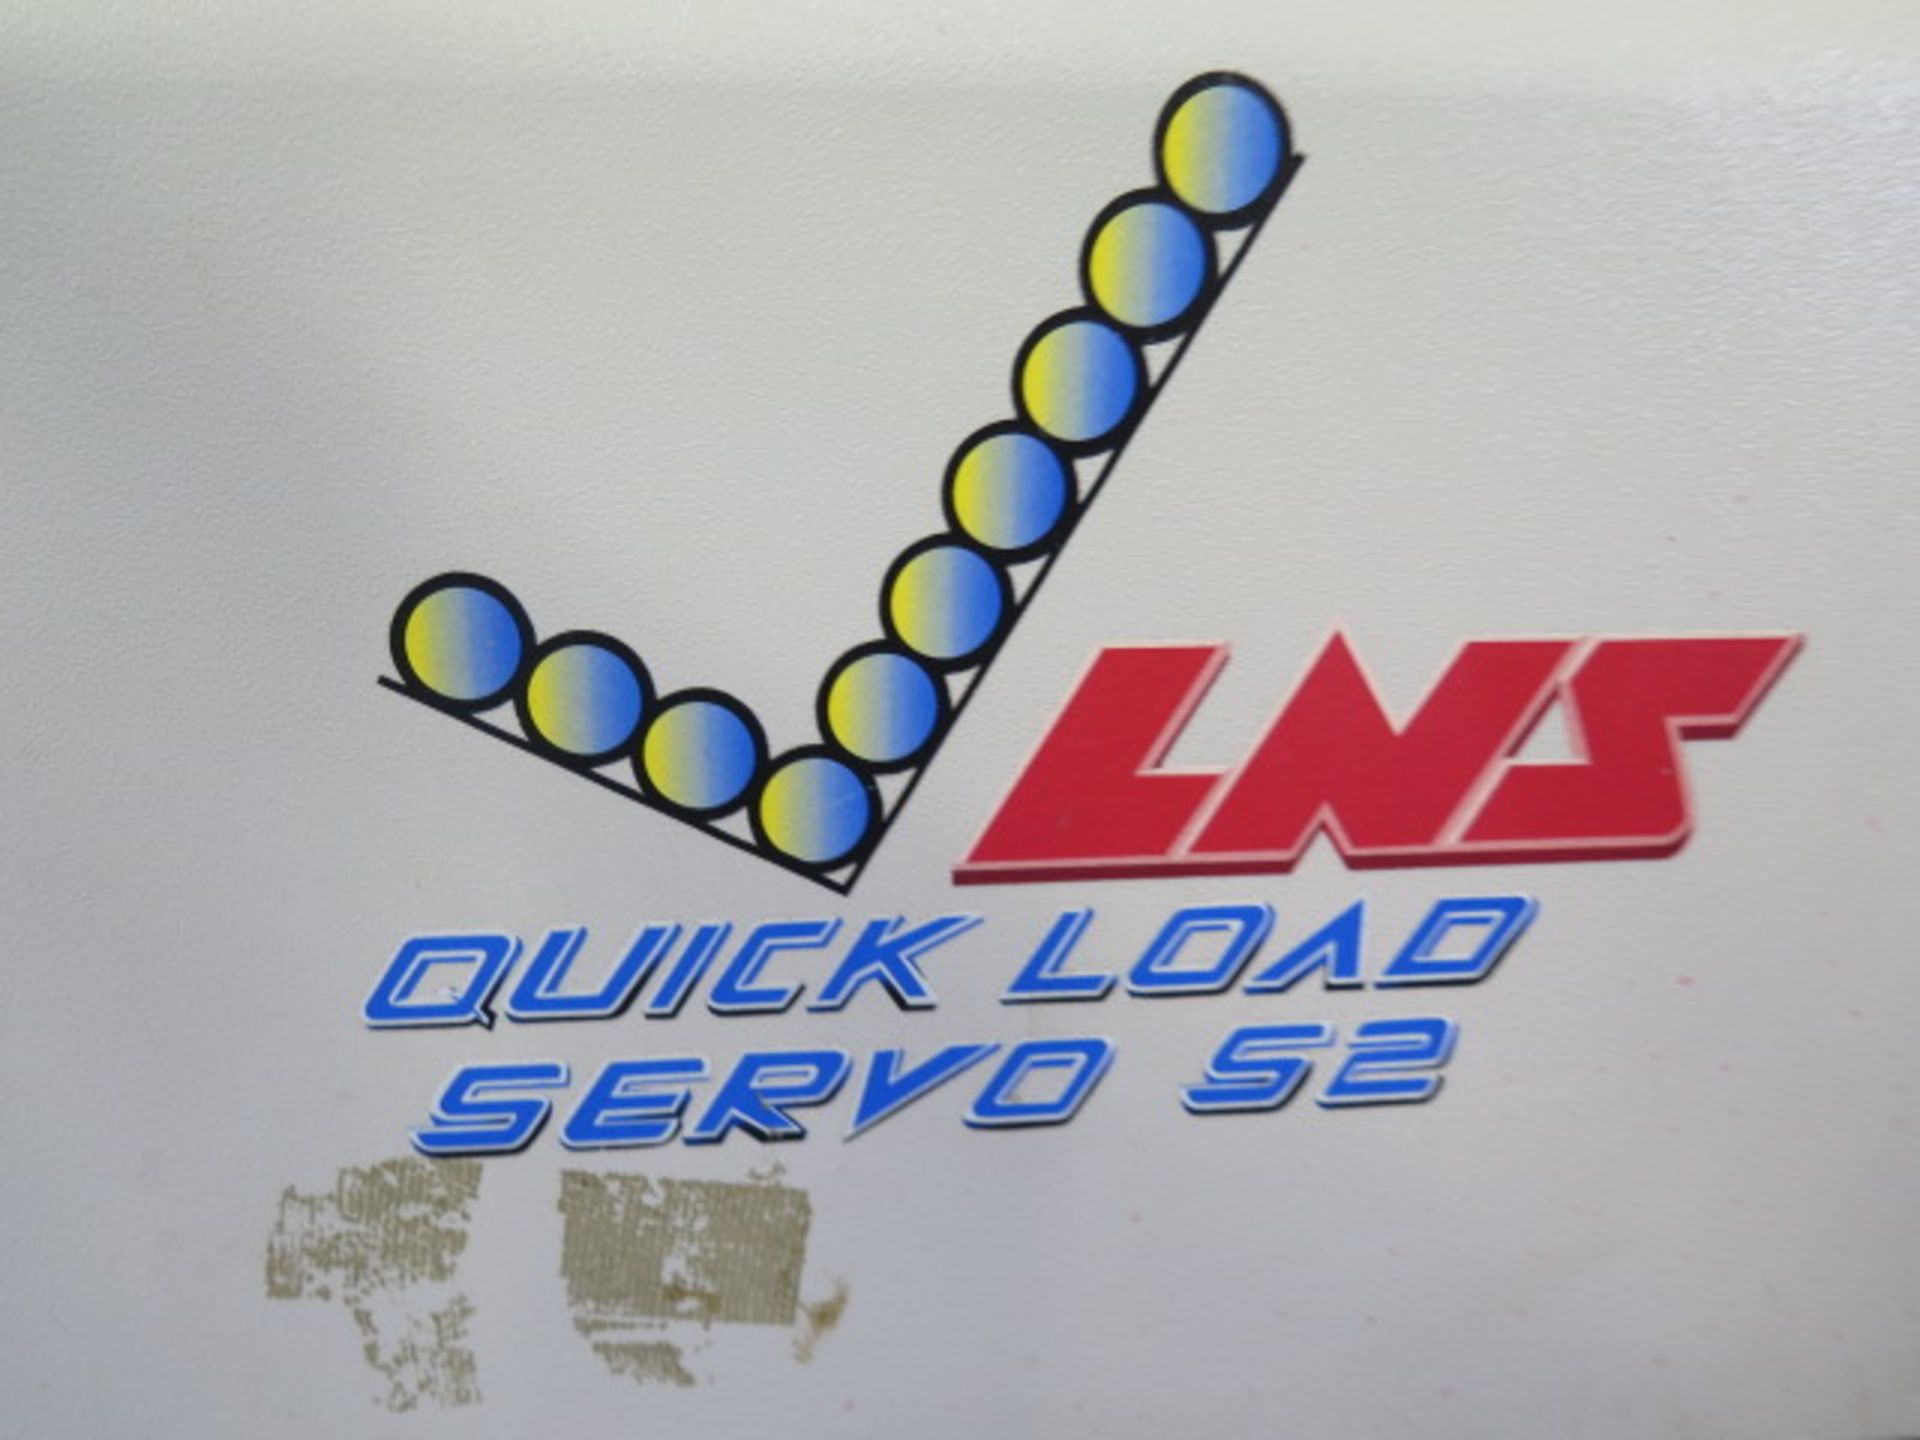 LNS Quick Load Automatic Bar Loader / Feeder (SOLD AS-IS - NO WARRANTY) - Image 7 of 9